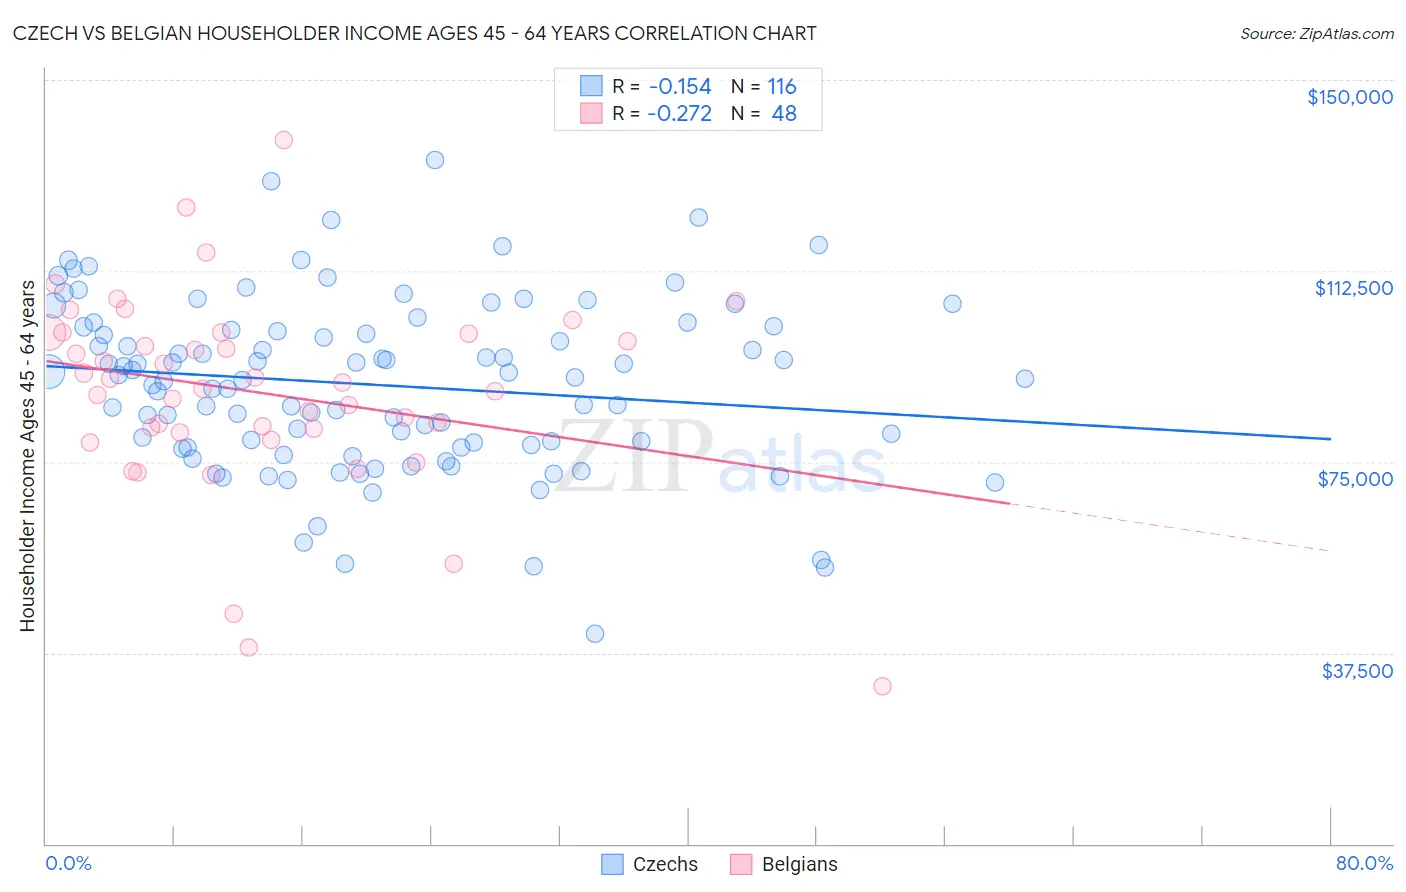 Czech vs Belgian Householder Income Ages 45 - 64 years